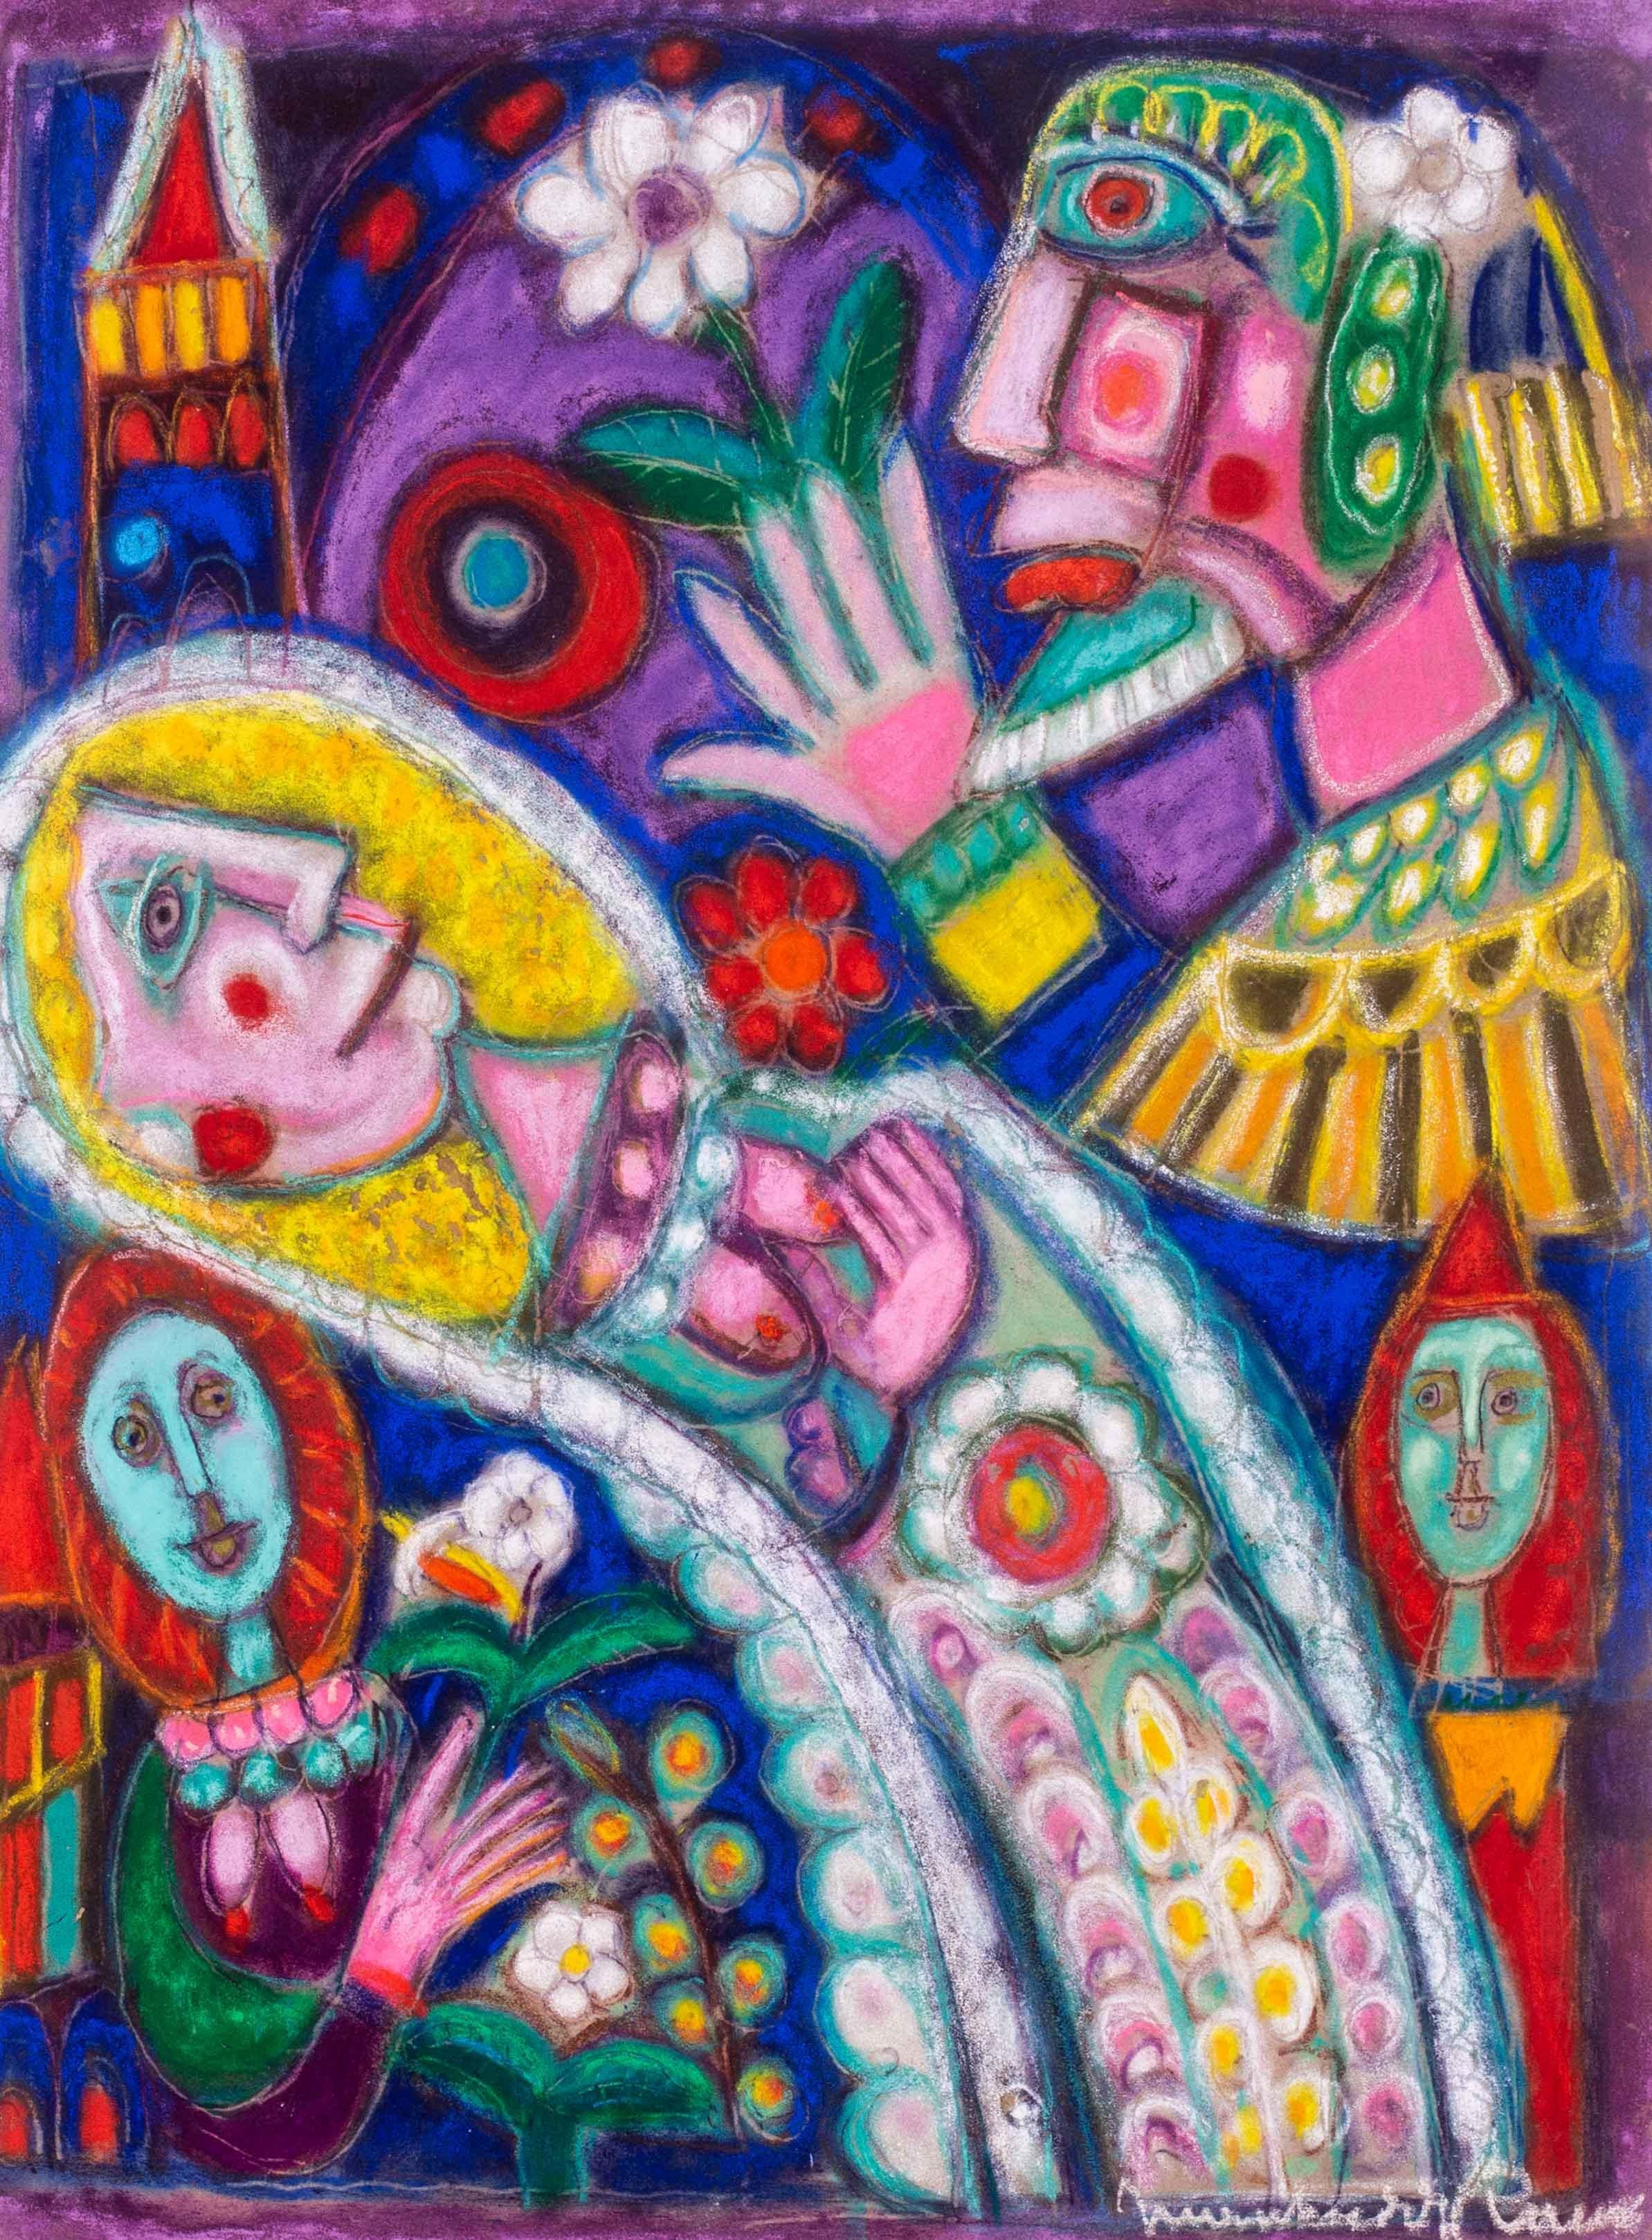 French Surrealist pastel drawing  'Offering to the bride' by Marchand des Raux - Art by Louis Marchand des Raux